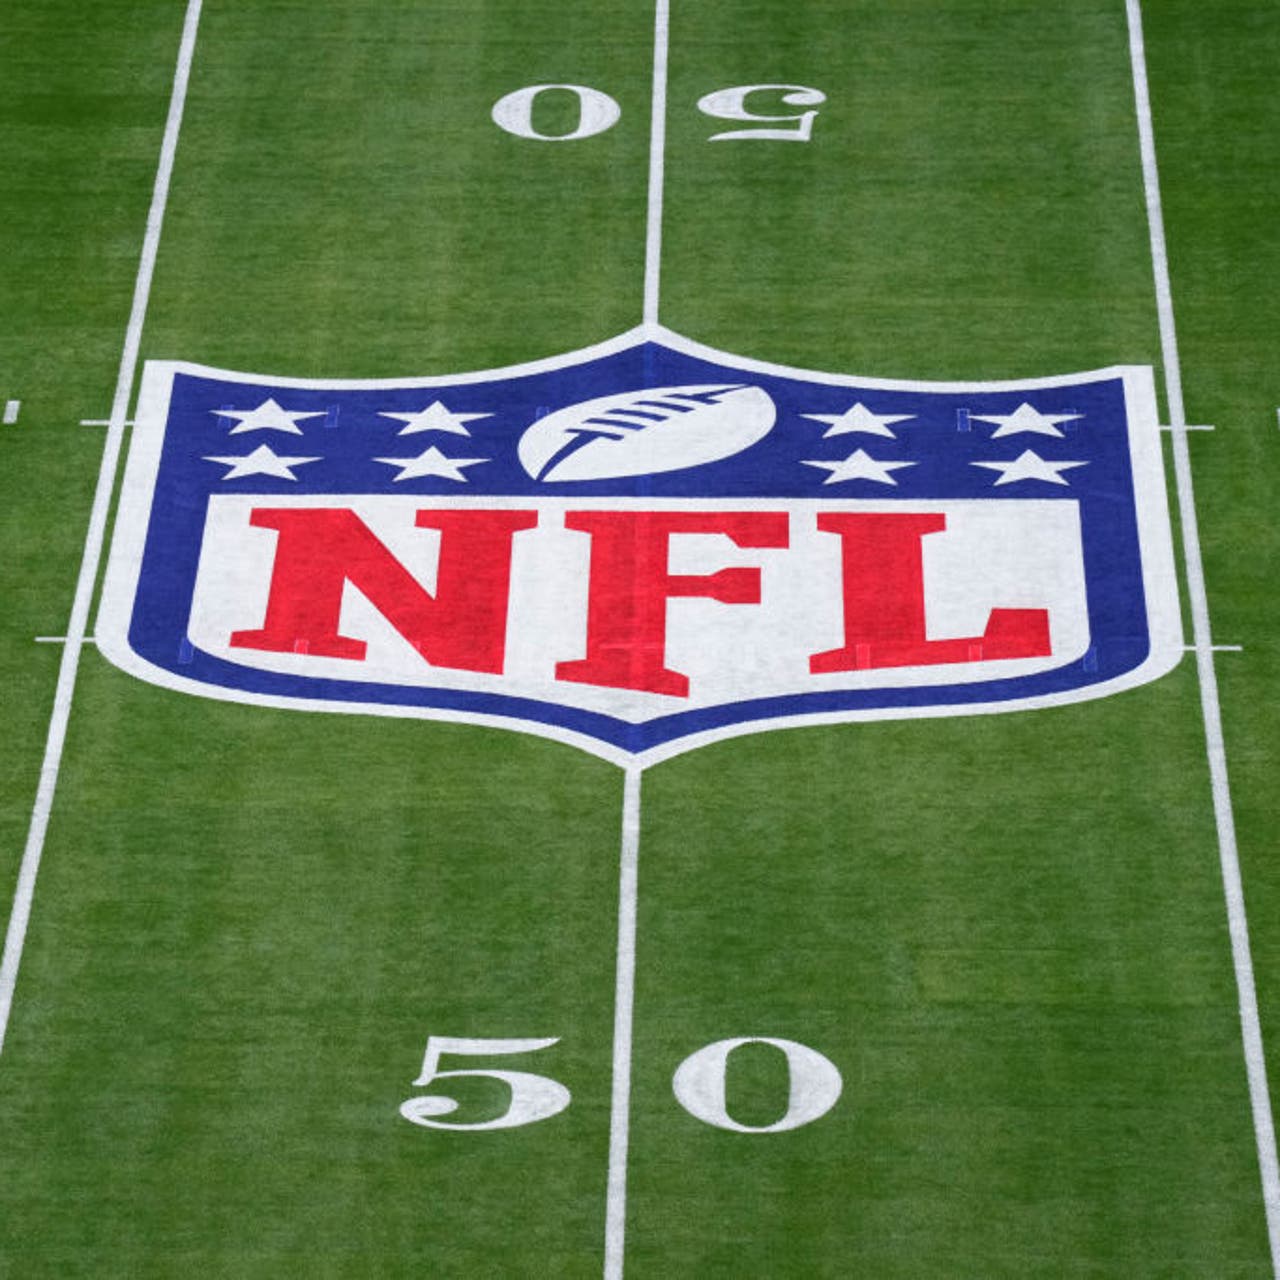 2023 NFL preseason schedule: Dates, times, channels, how to watch